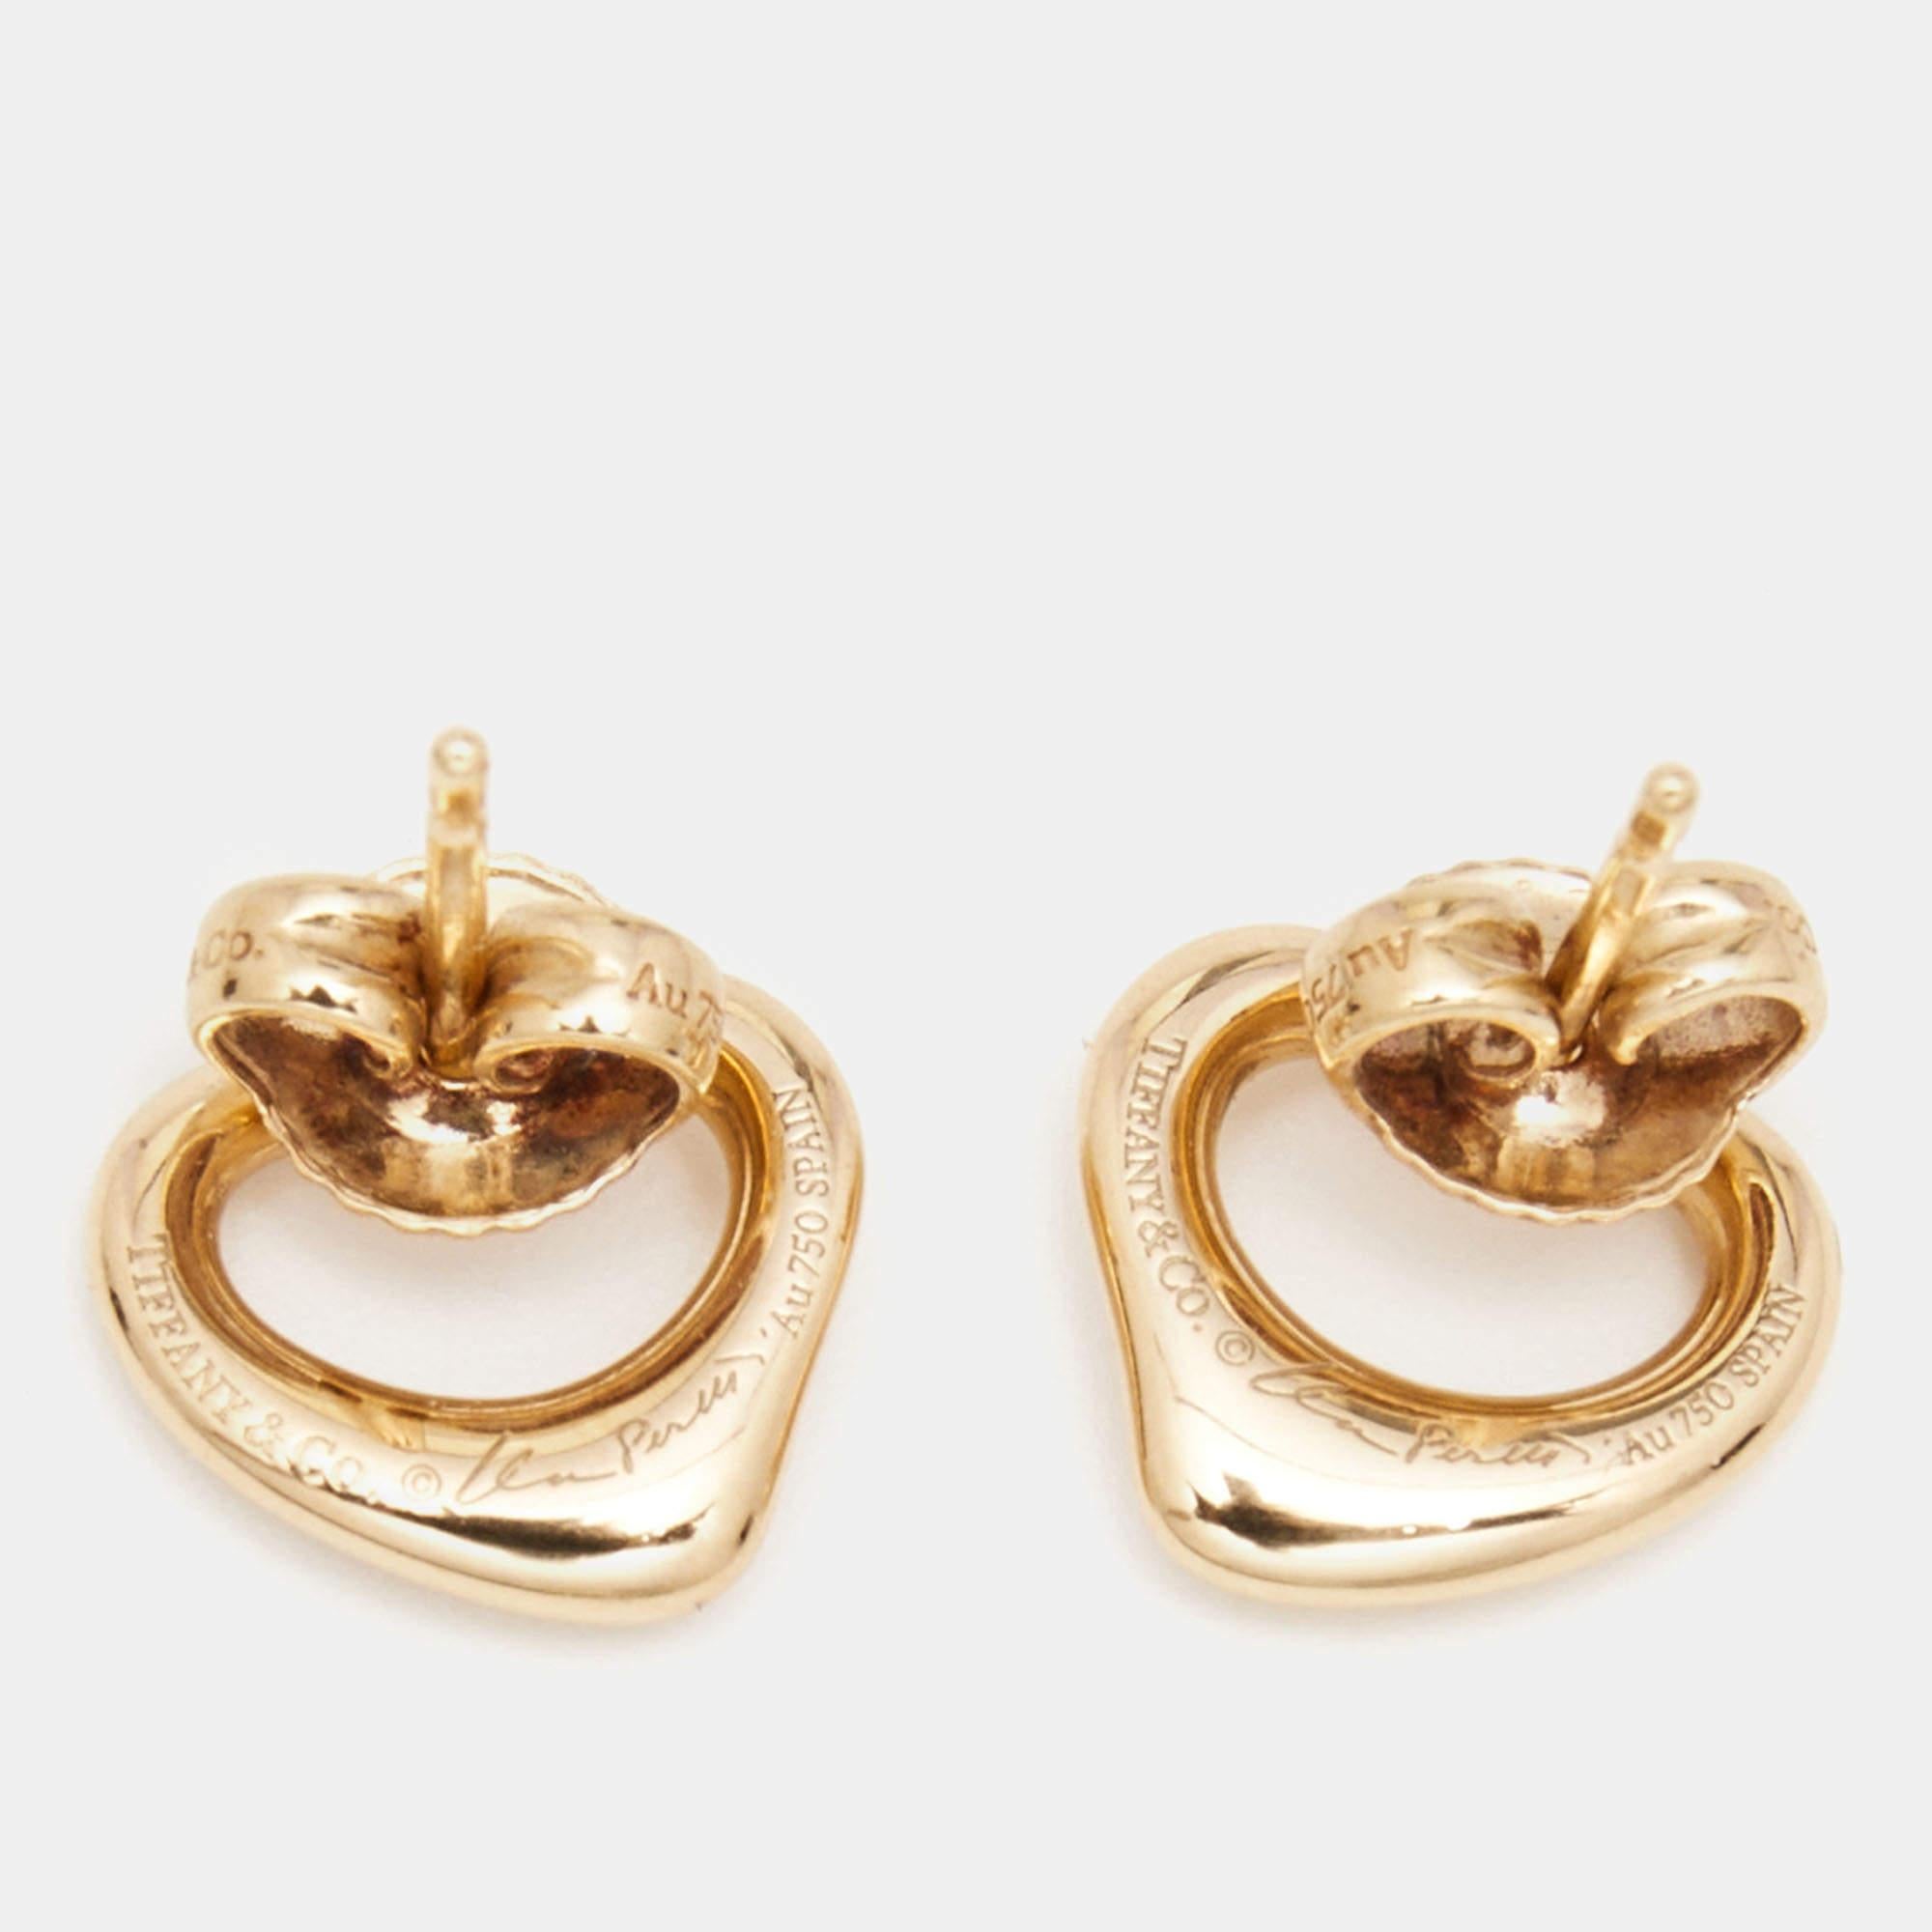 Designed with 18k rose gold, these Elsa Peretti Open Heart earrings from Tiffany & Co. will complement a day or evening look. Balance your outfits with this elegant pair.

Includes: Original Case
